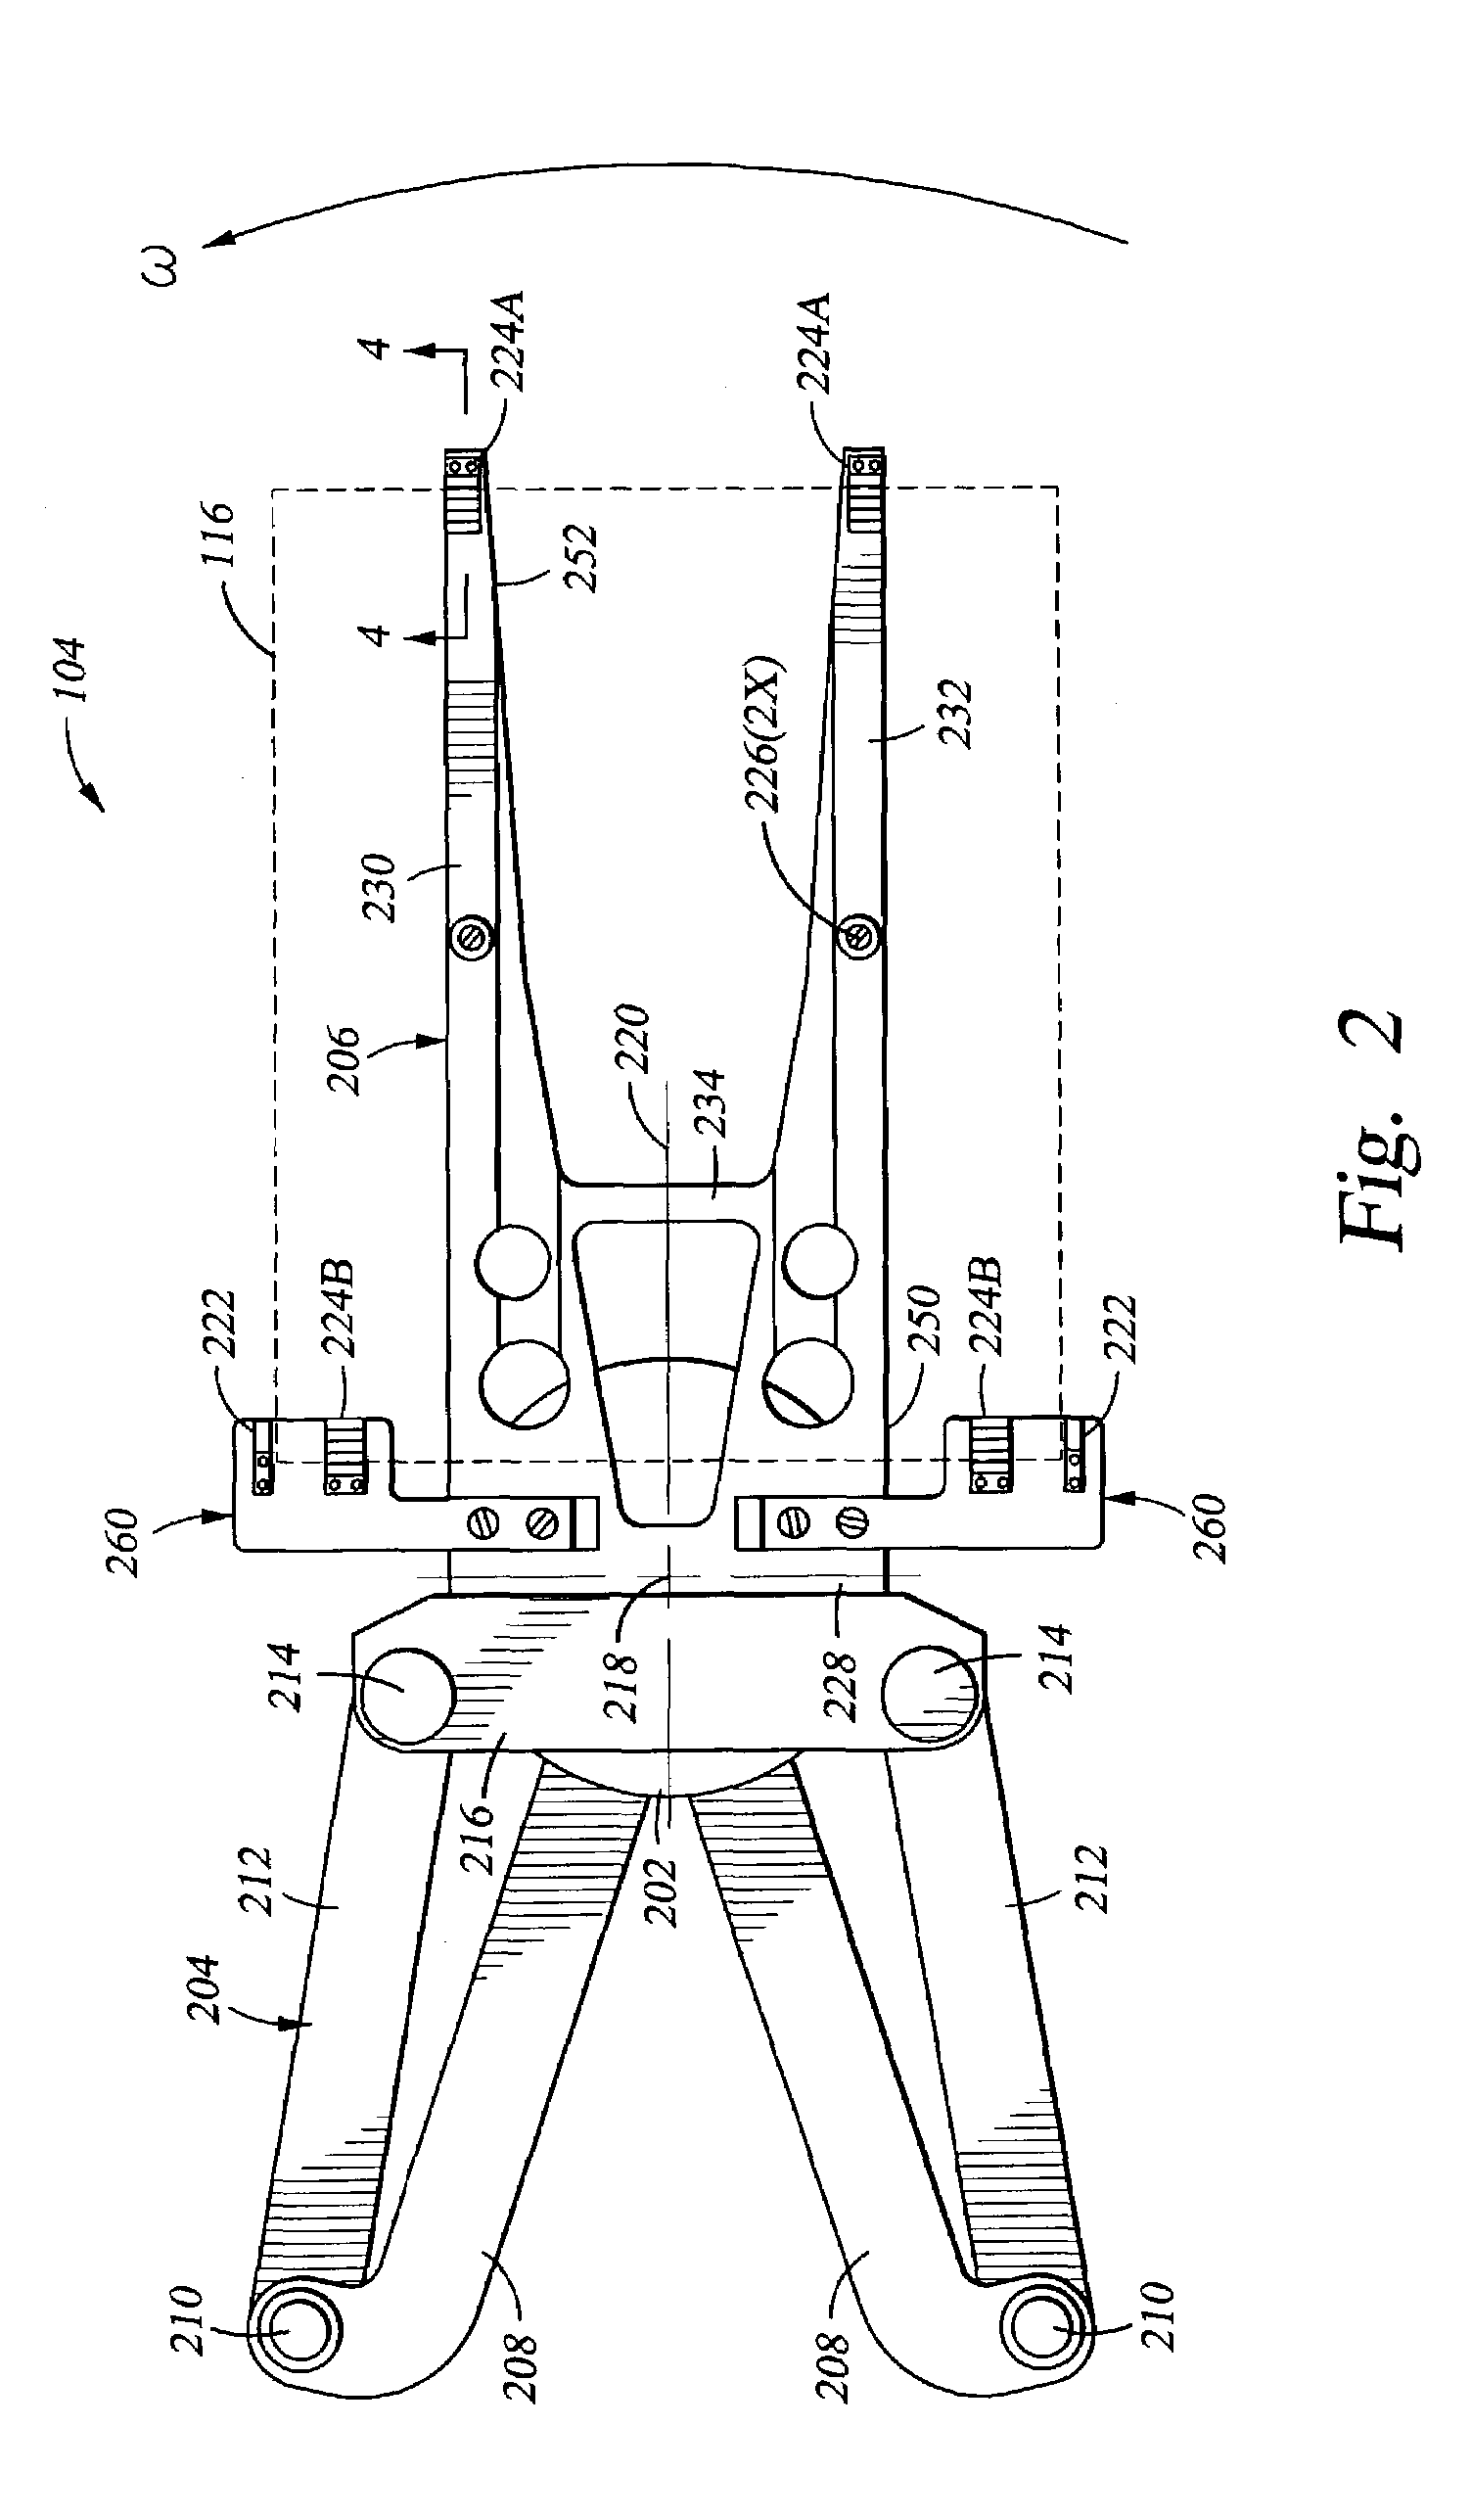 End effector assembly for supporting a substrate